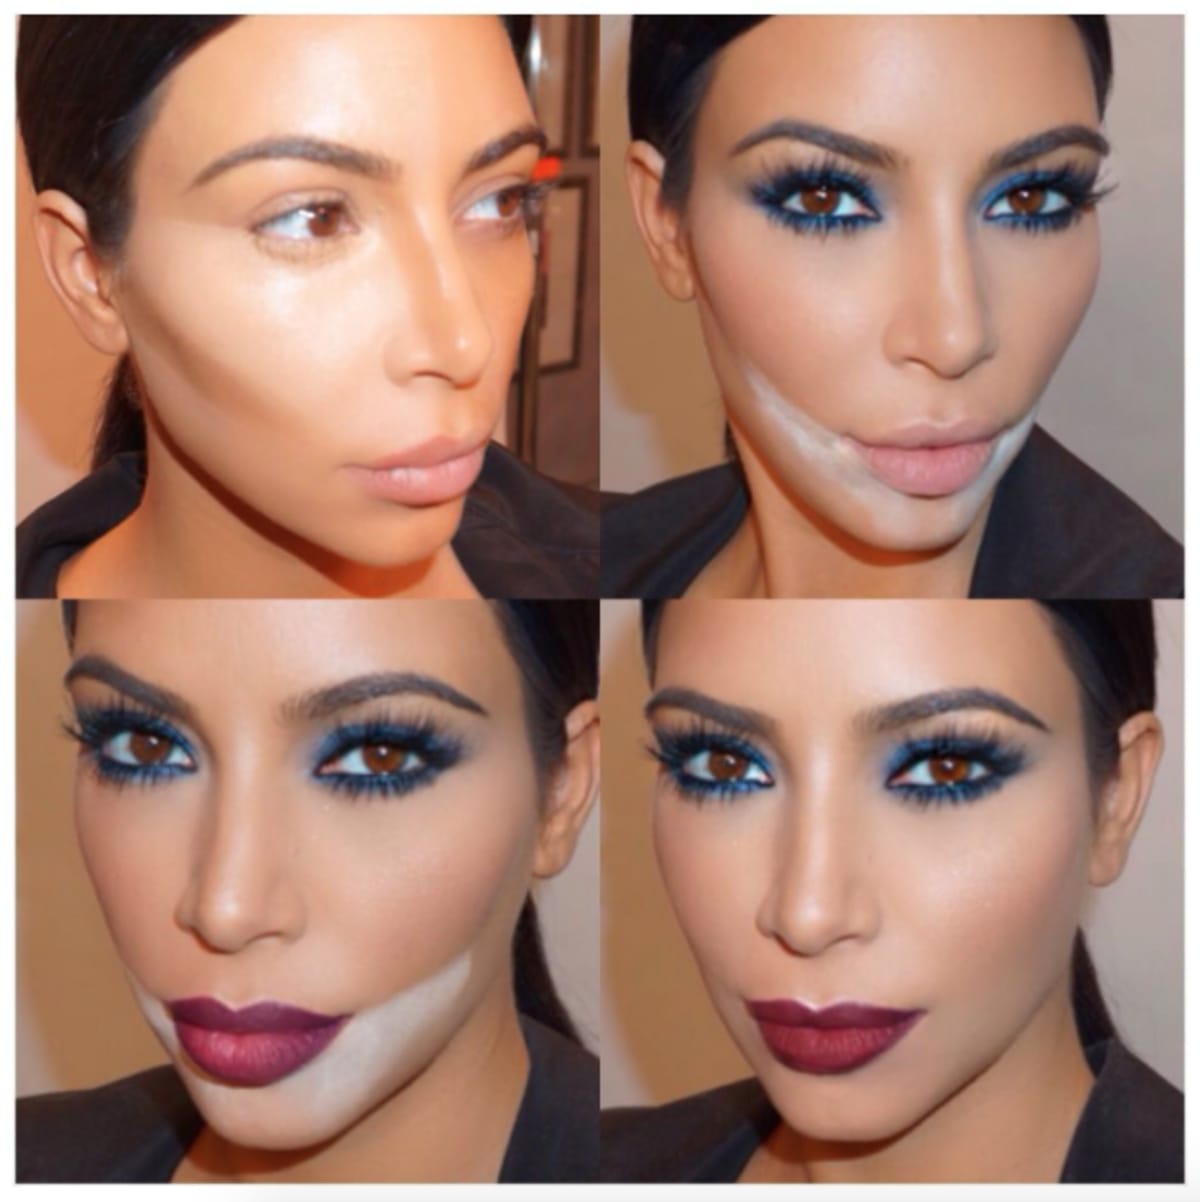 Kim Kardashian S Daily Makeup Routine Involves 50 Steps And 1 200 Worth Of Cosmetic Products